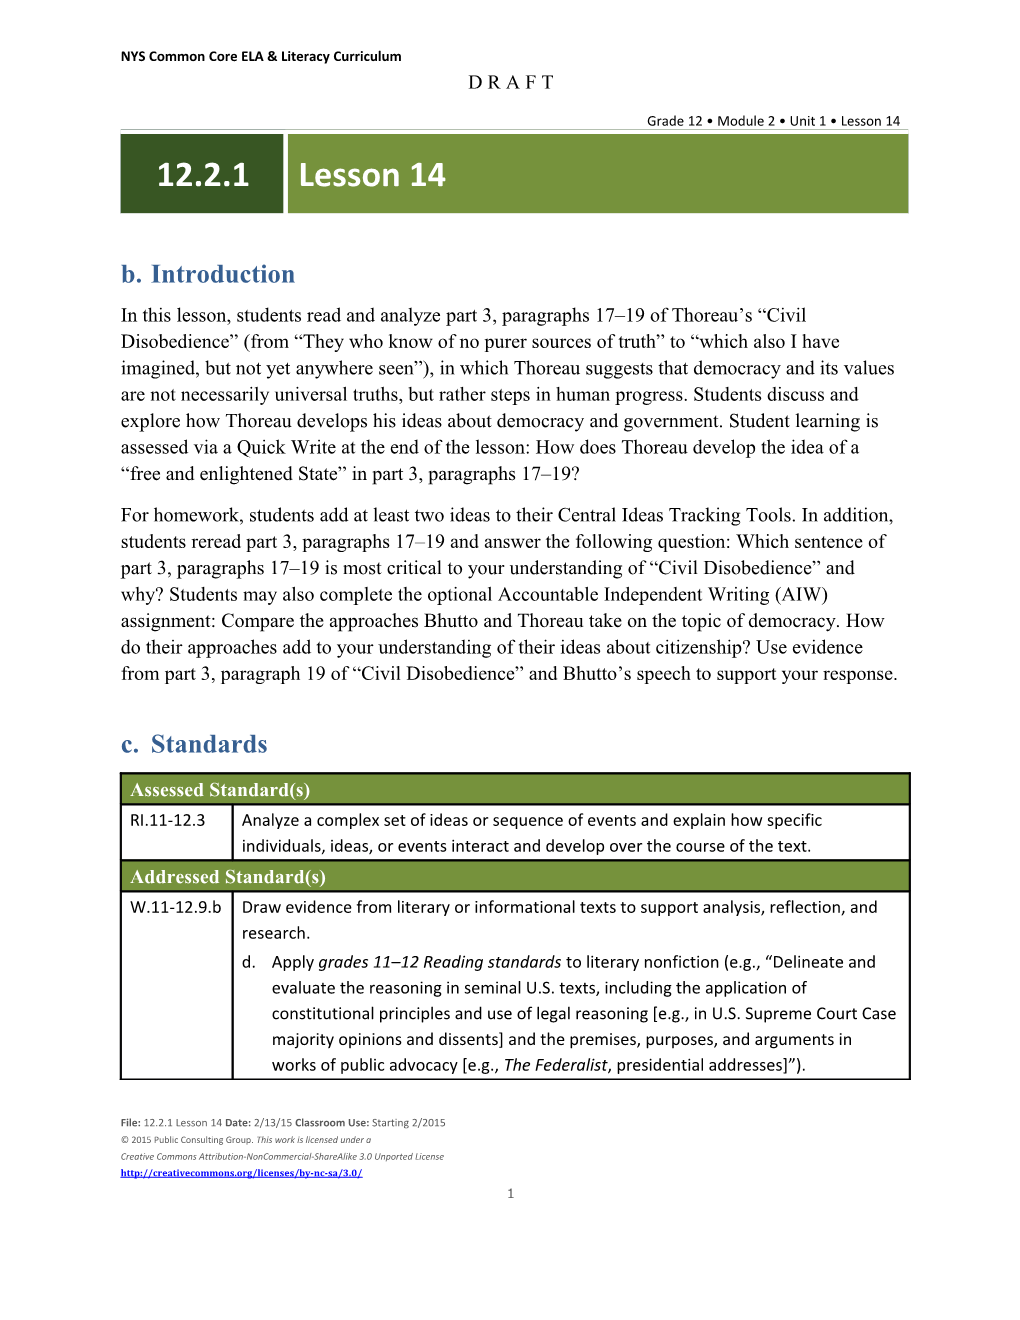 In This Lesson, Students Read and Analyze Part 3, Paragraphs 17 19 of Thoreau S Civil